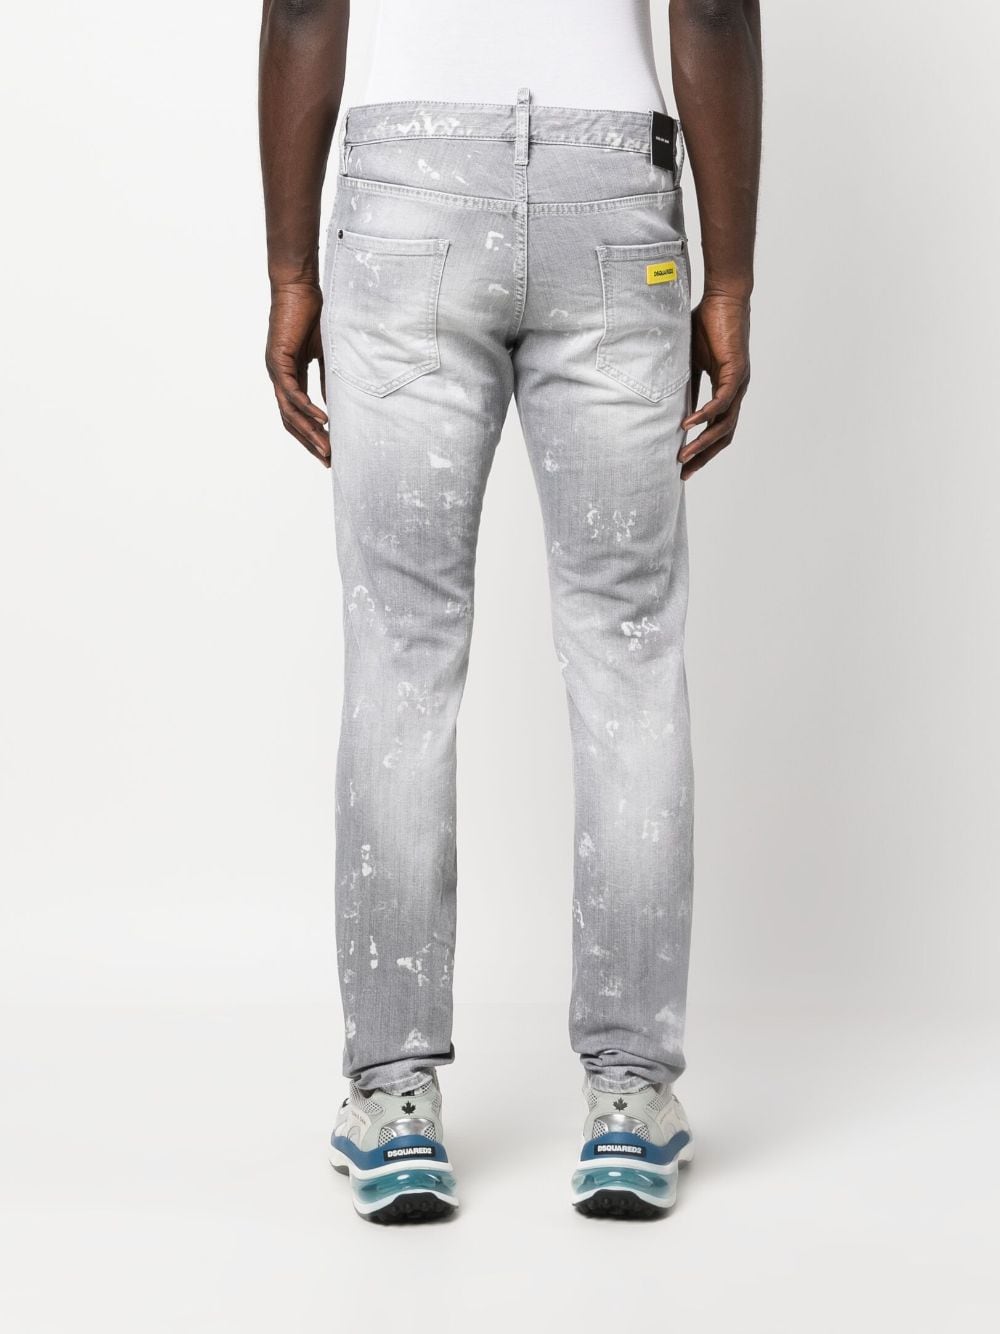 DSQUARED2 - Jean cool guy gris